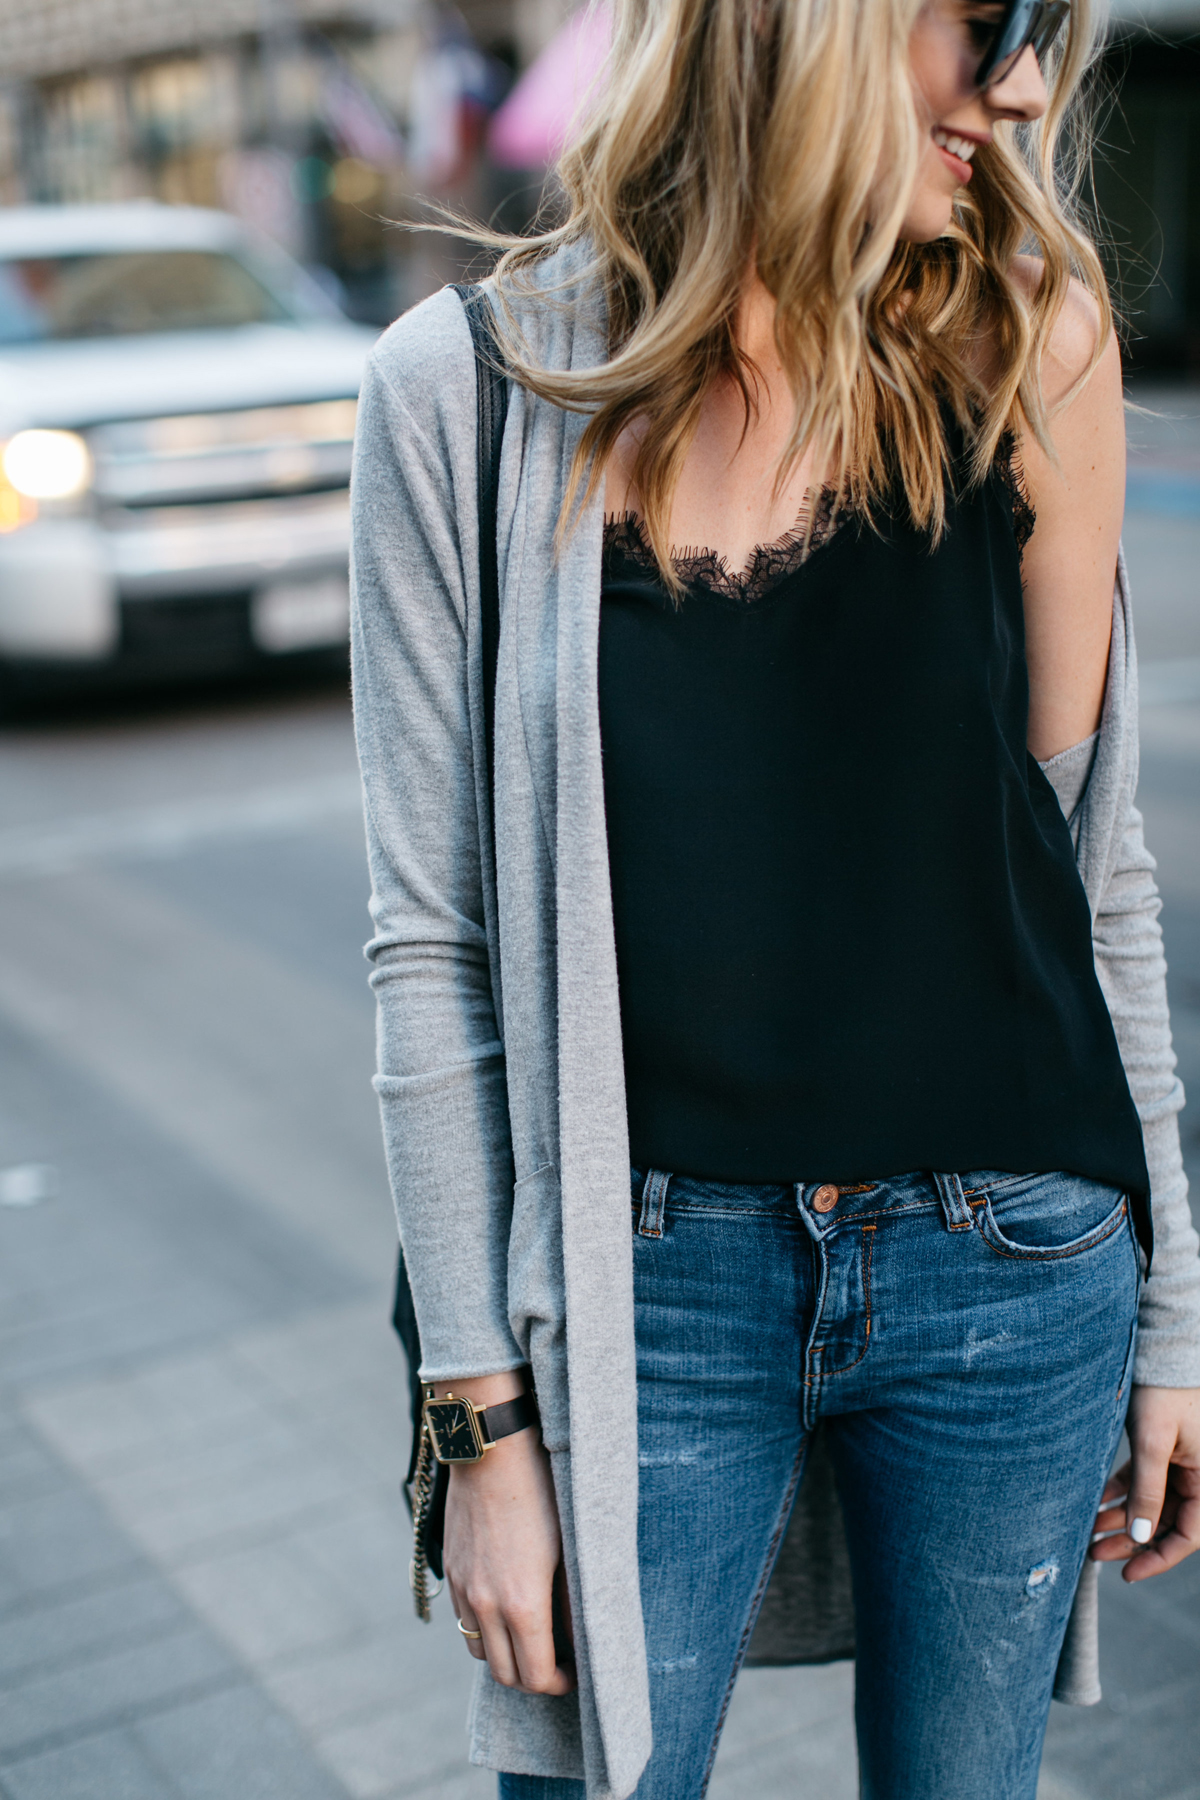 Fall Outfit, Winter Outfit, Anine Bing Black Lace Tank, Grey Long Cardigan, Denim Ripped Skinny Jeans